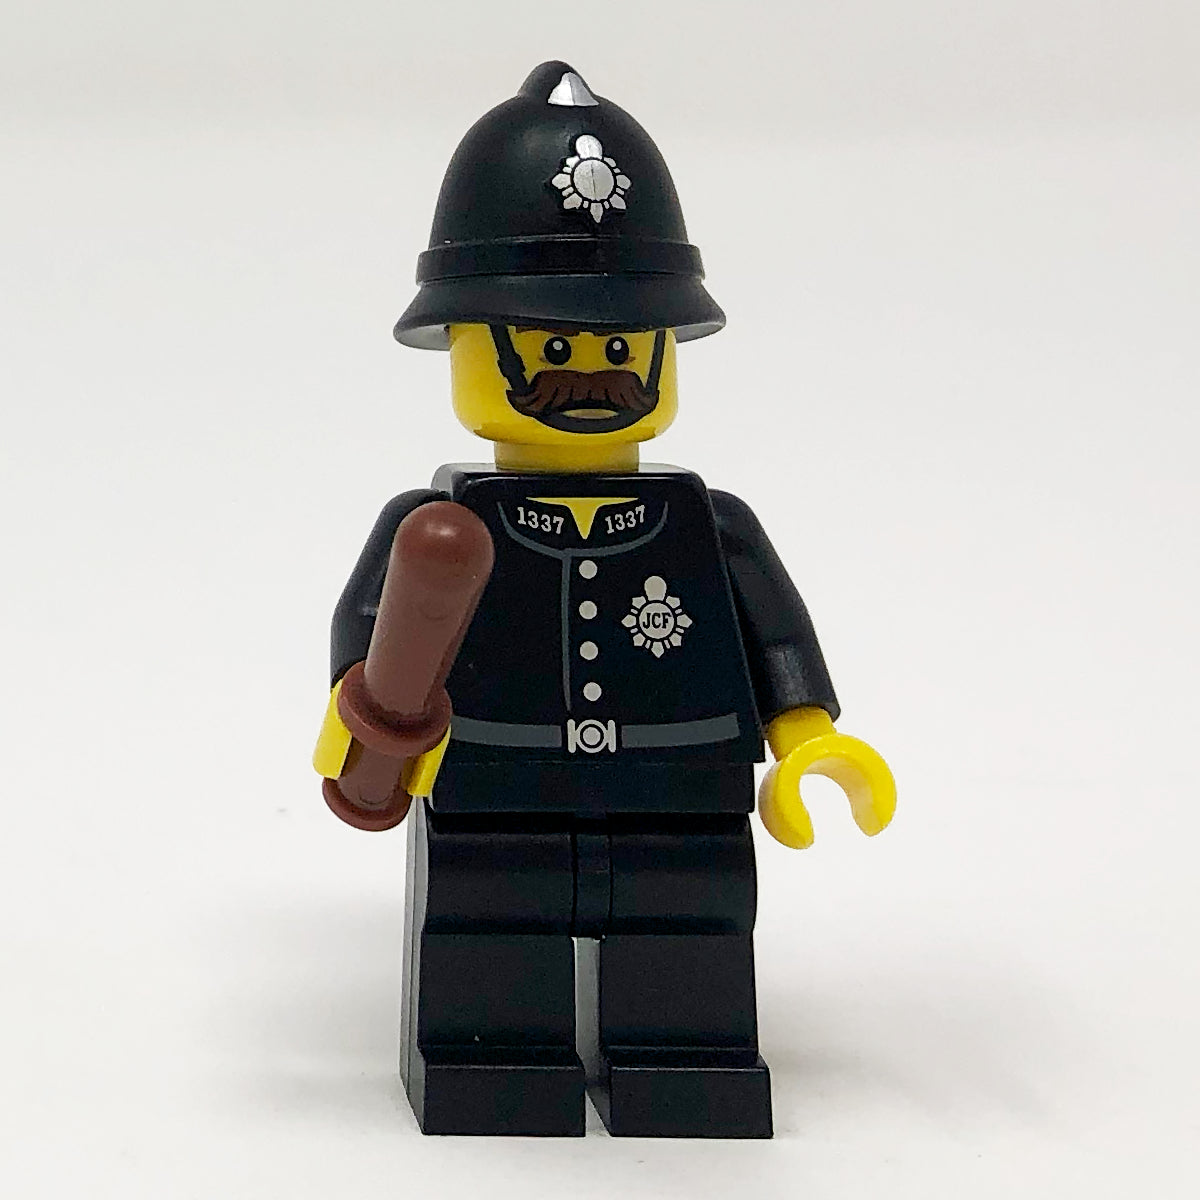 S11 Constable - Series 11 Minifigure (col177)